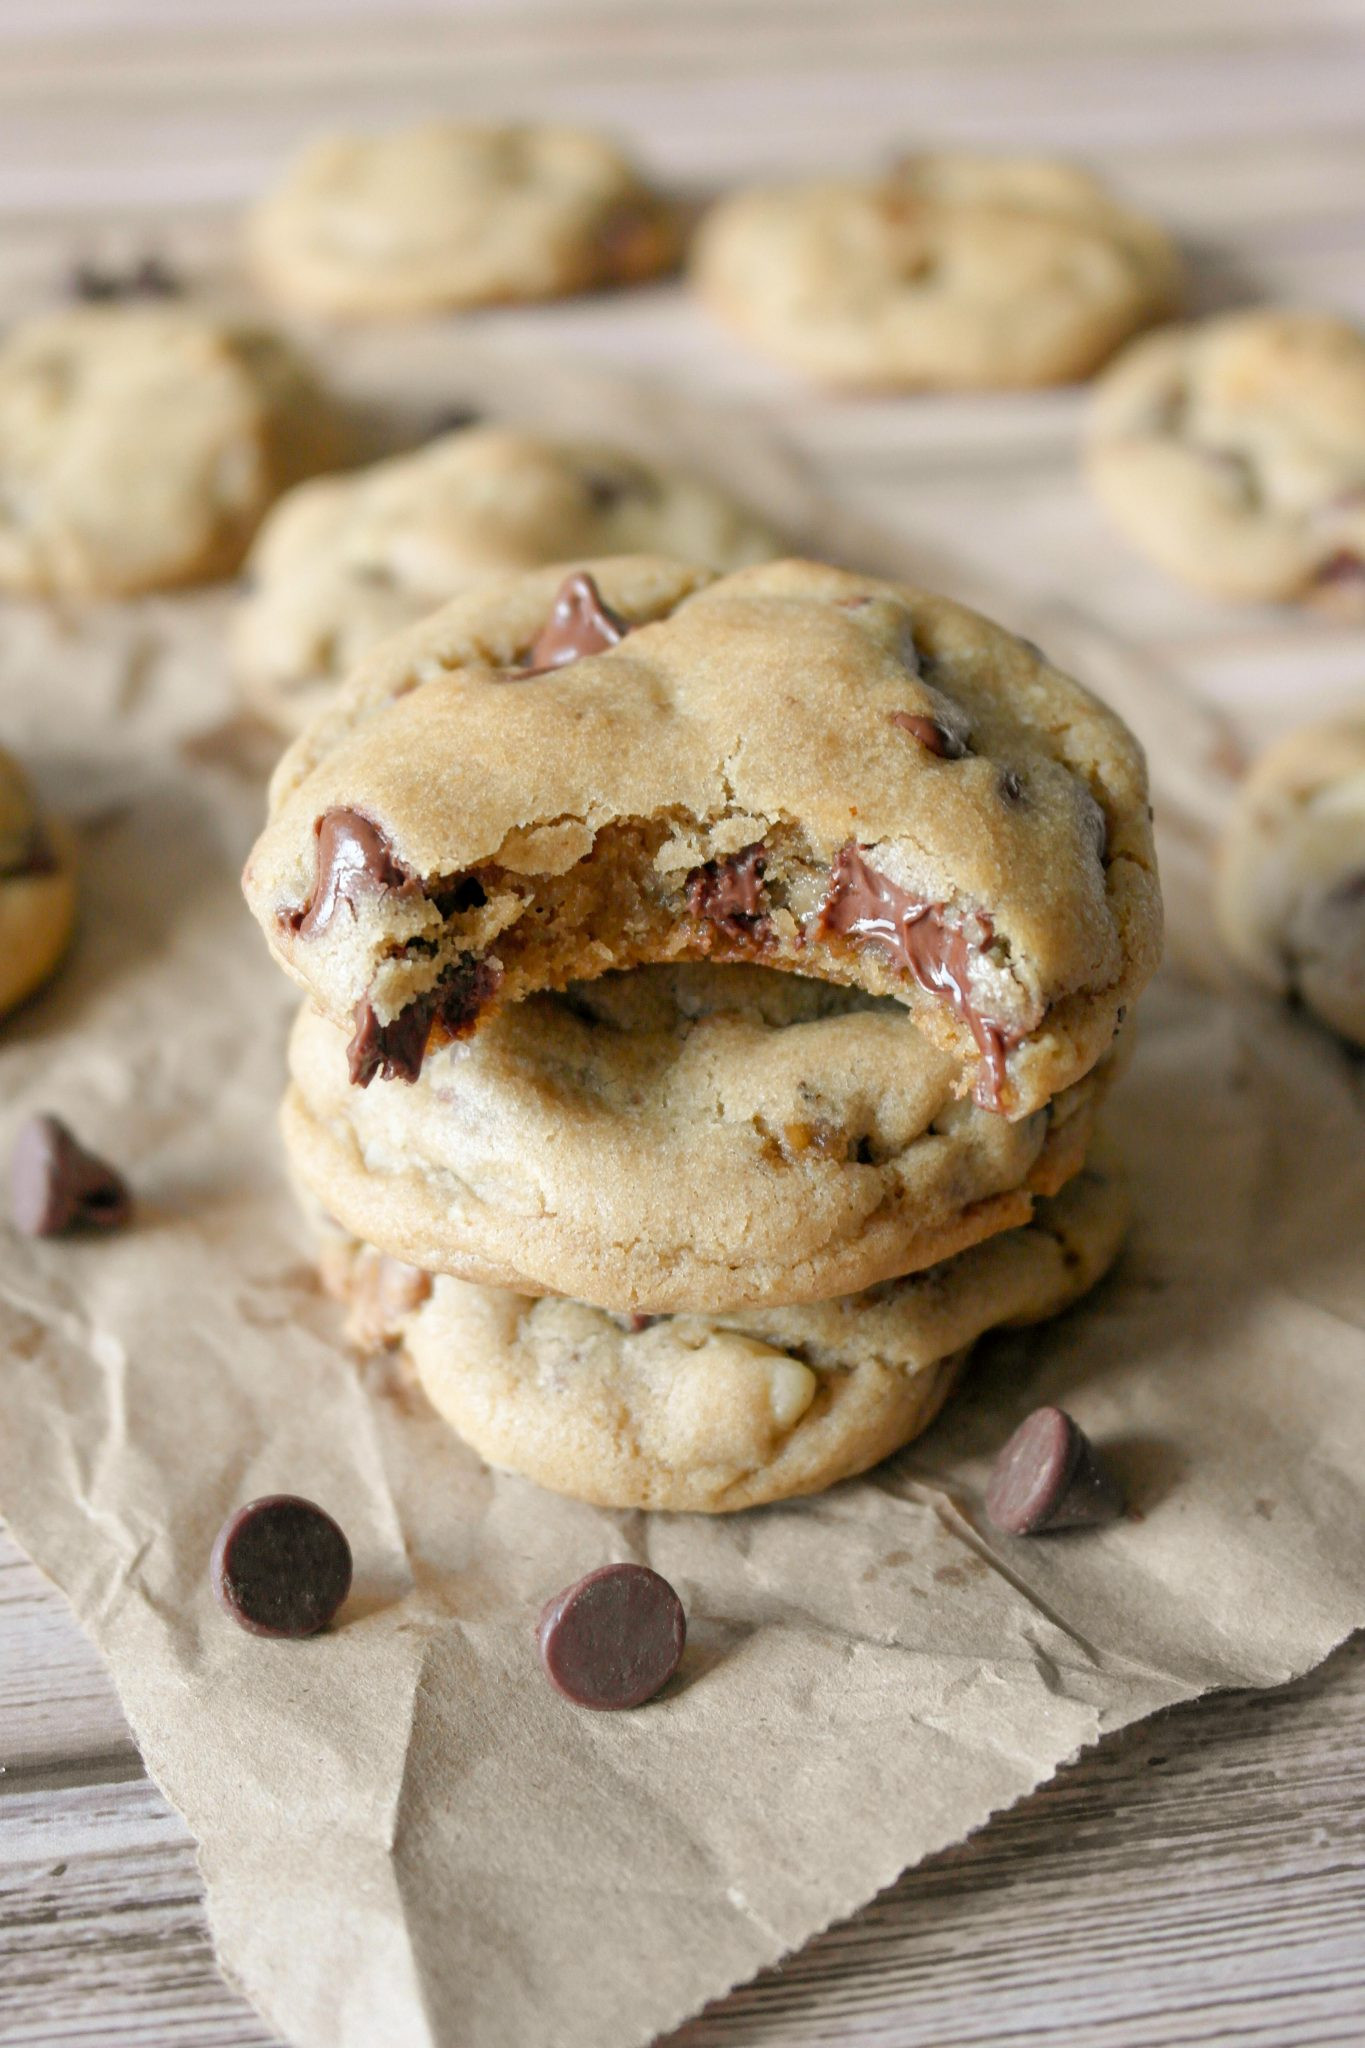 Best Chocolate Chip Cookies Recipe
 15 of the Best Chocolate Chip Cookie Recipes The